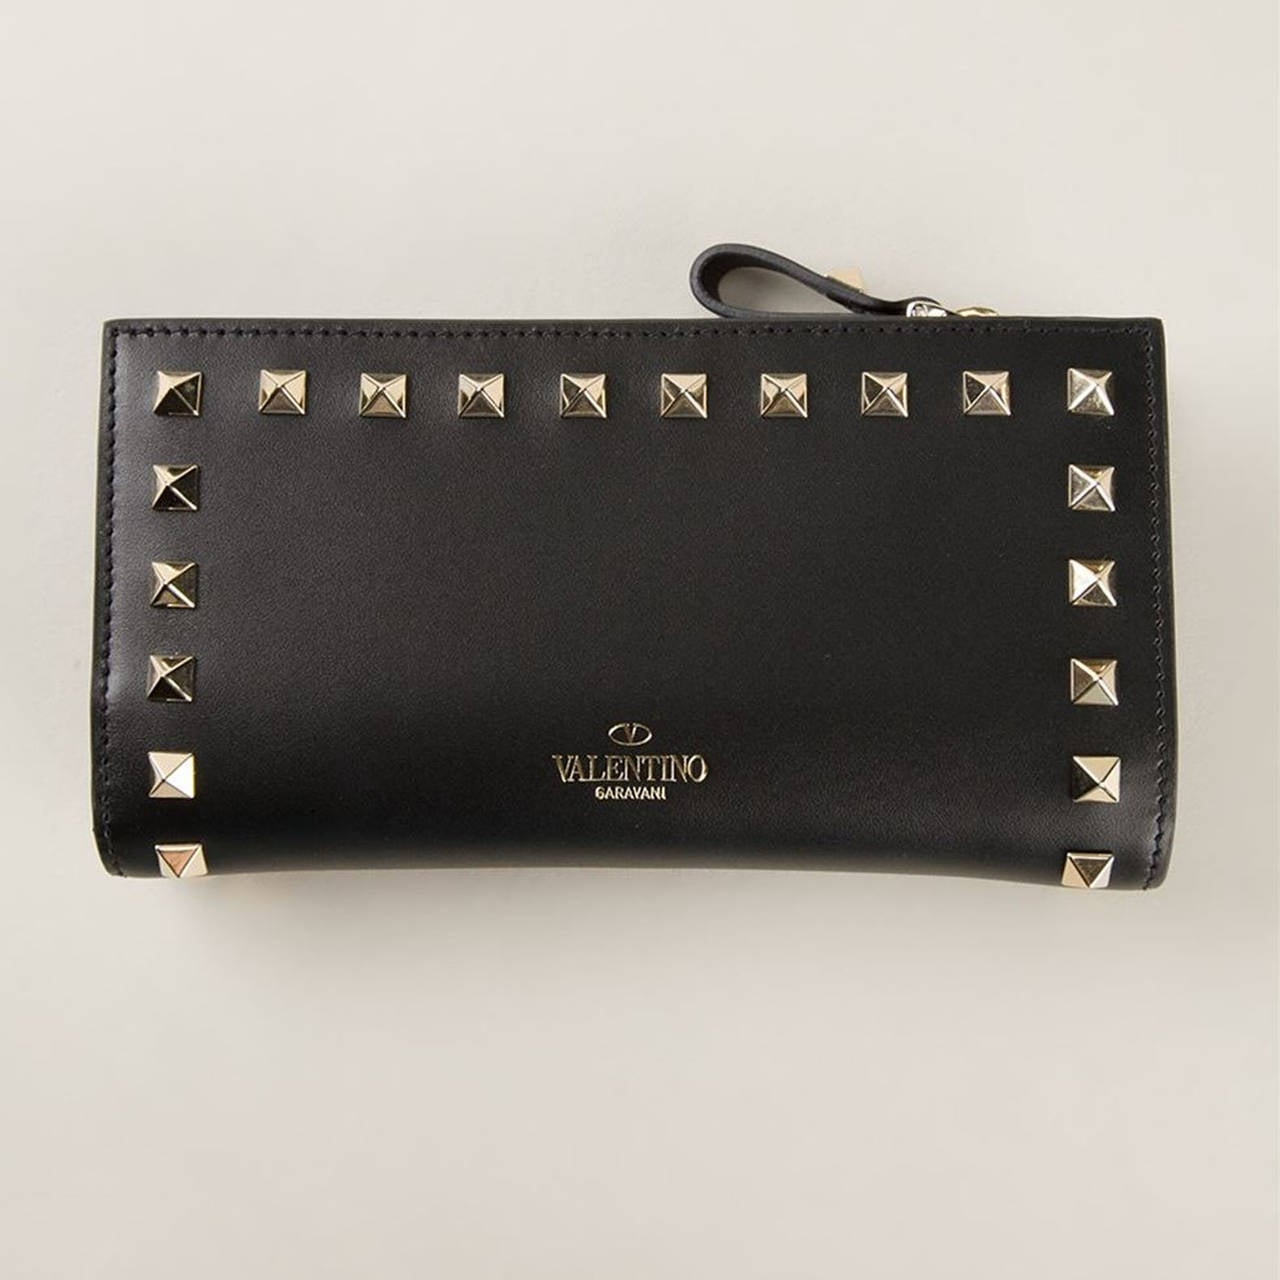 This Valentino Garavani wallet features a snap button closure, gold-tone Rockstud embellishments, a back embossed logo stamp, an interior zipped compartment and multiple interior card slots.

Measurements: height: 10 cm, depth: 3 cm, width: 18